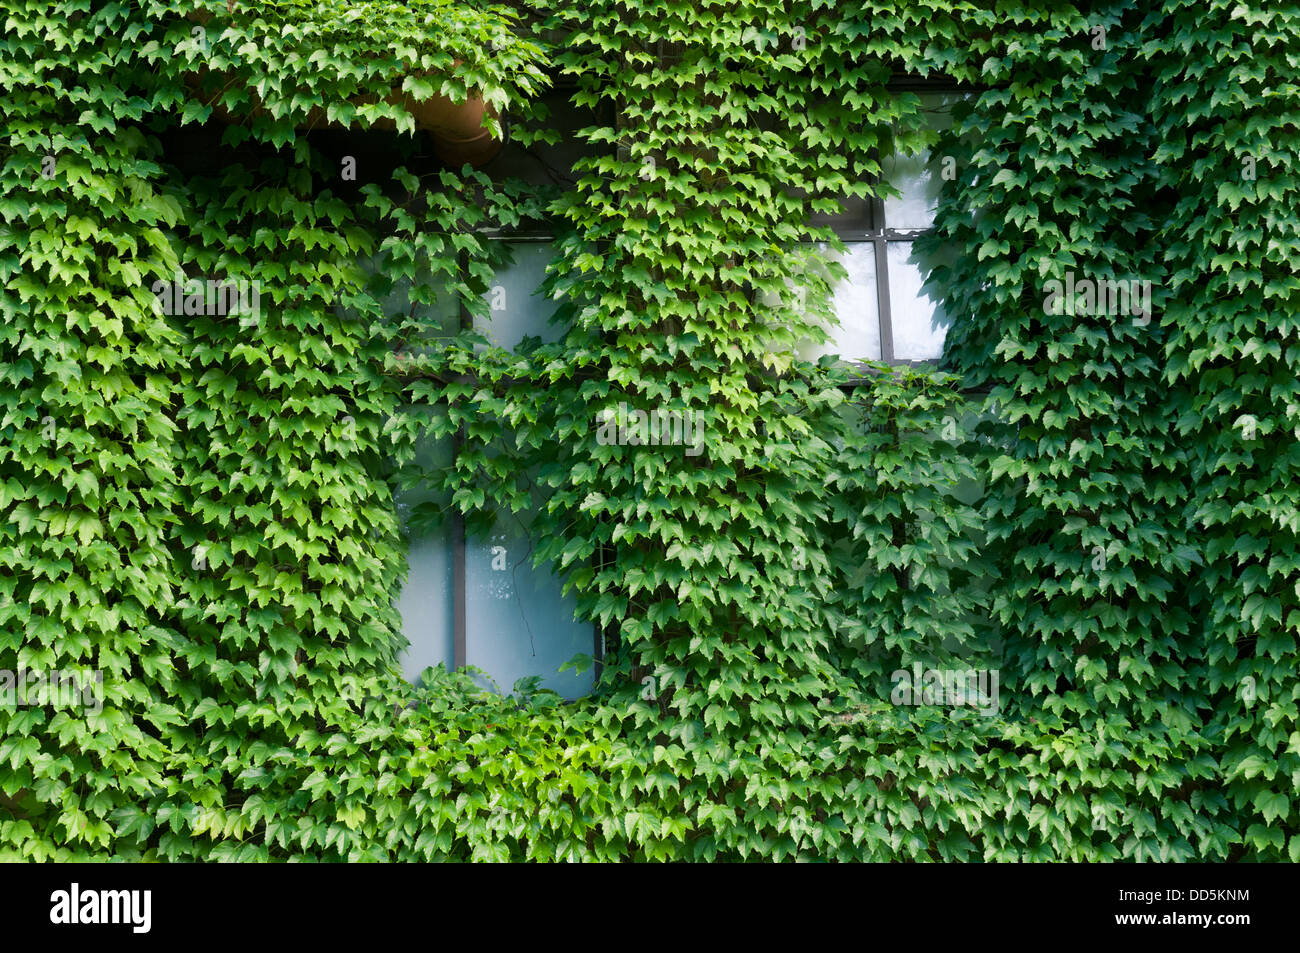 building wall with windows hidden by green ivy leafs Stock Photo